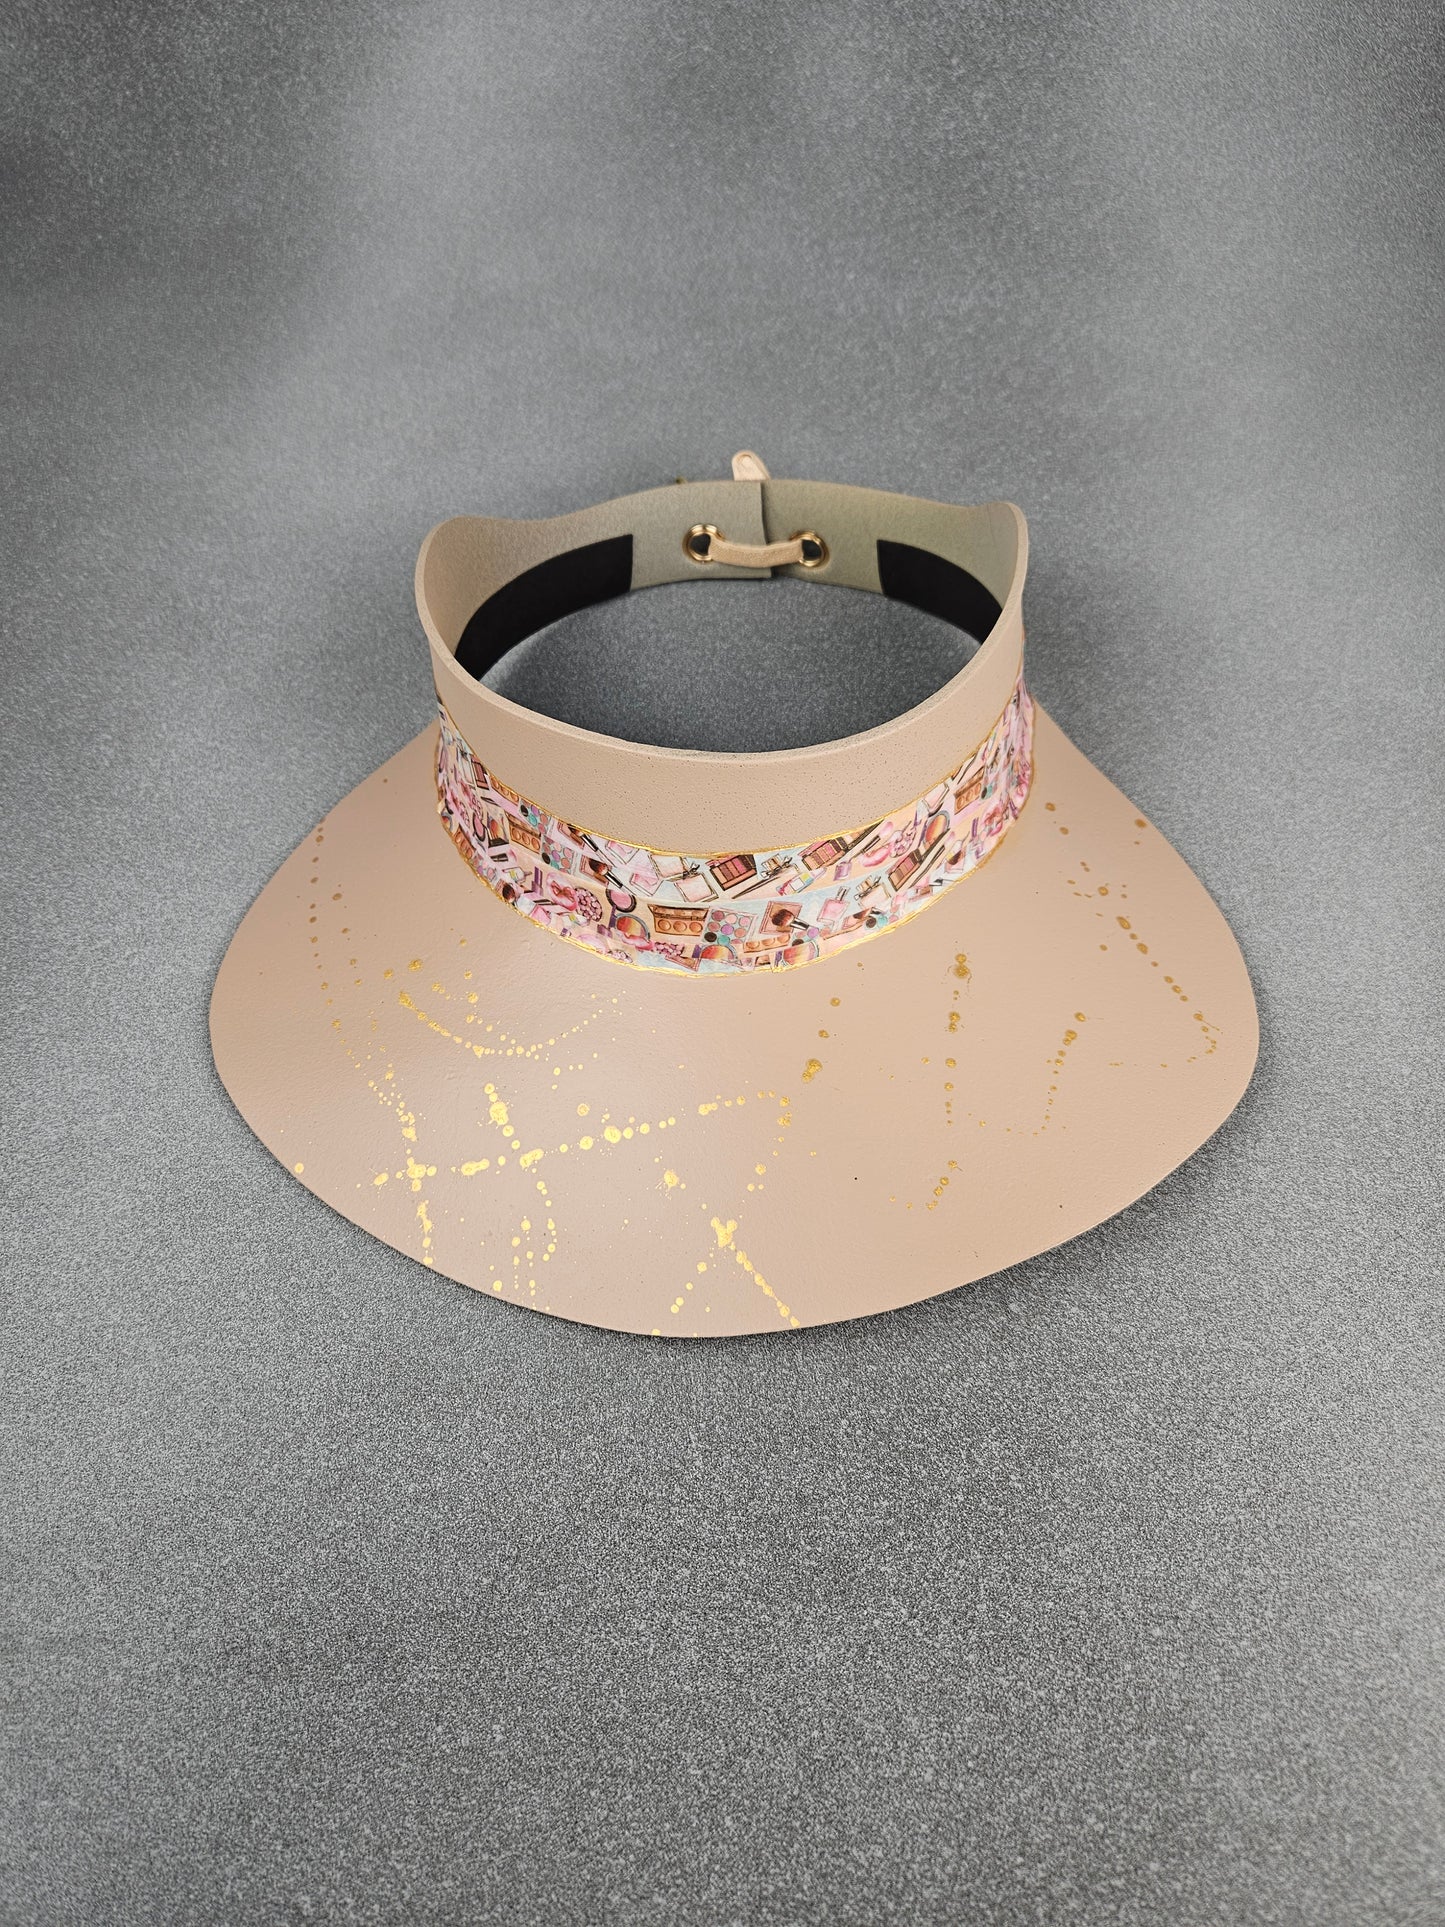 Peachy Beige Audrey Sun Visor Hat with Unique and Fun Cosmetic Themed Collage Band and Golden Paint Splatter Effect: UV Resistant, Walks, Brunch, Golf, Wedding, Church, No Headache, 1950s, Pool, Beach, Big Brim, Summer